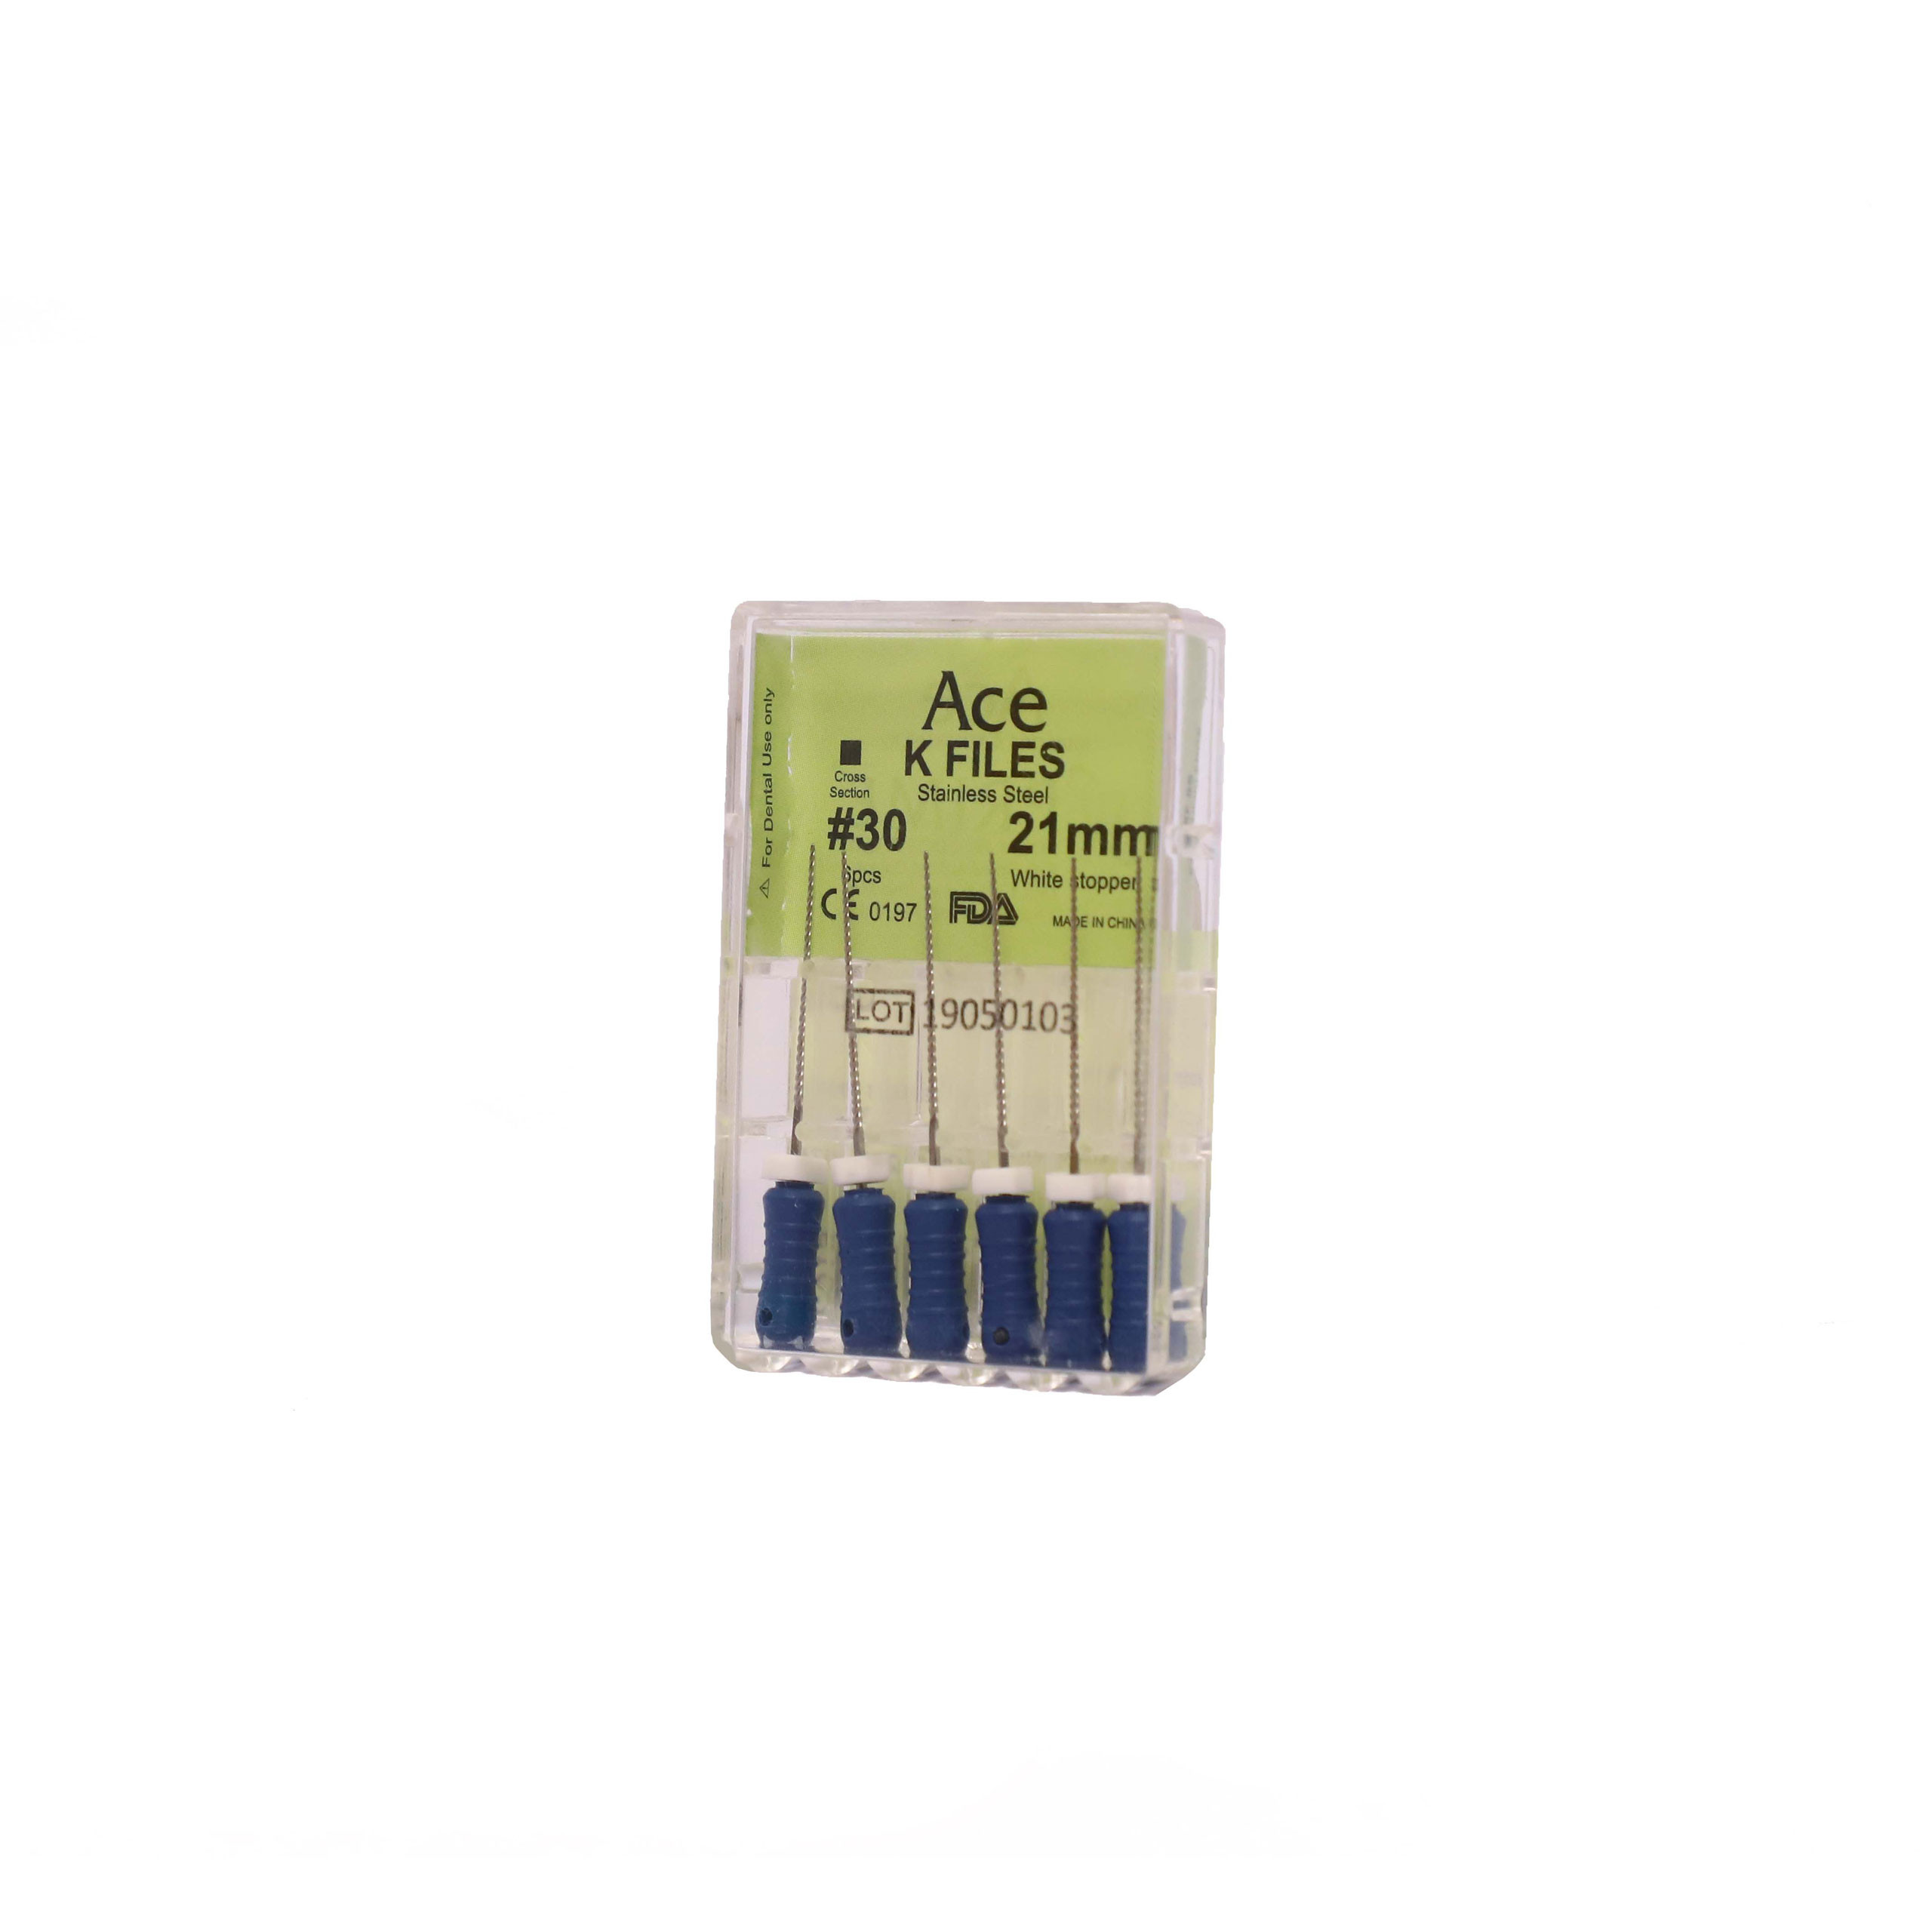 Prime Ace K Files #30, 21mm (Pack Of 5)